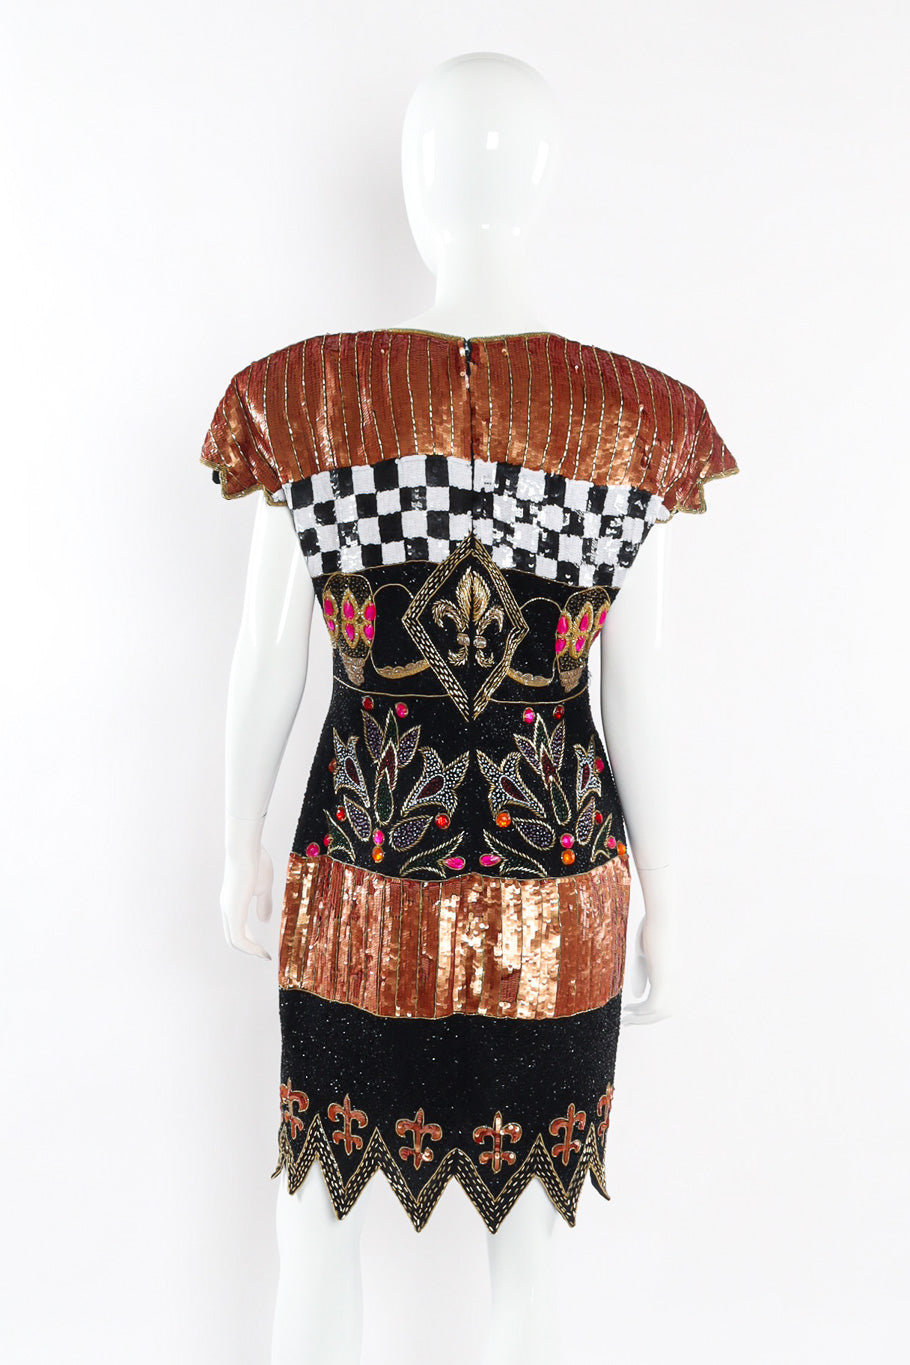 Multi Embellished Cocktail Dress by Fashion Creation Back View @recessla